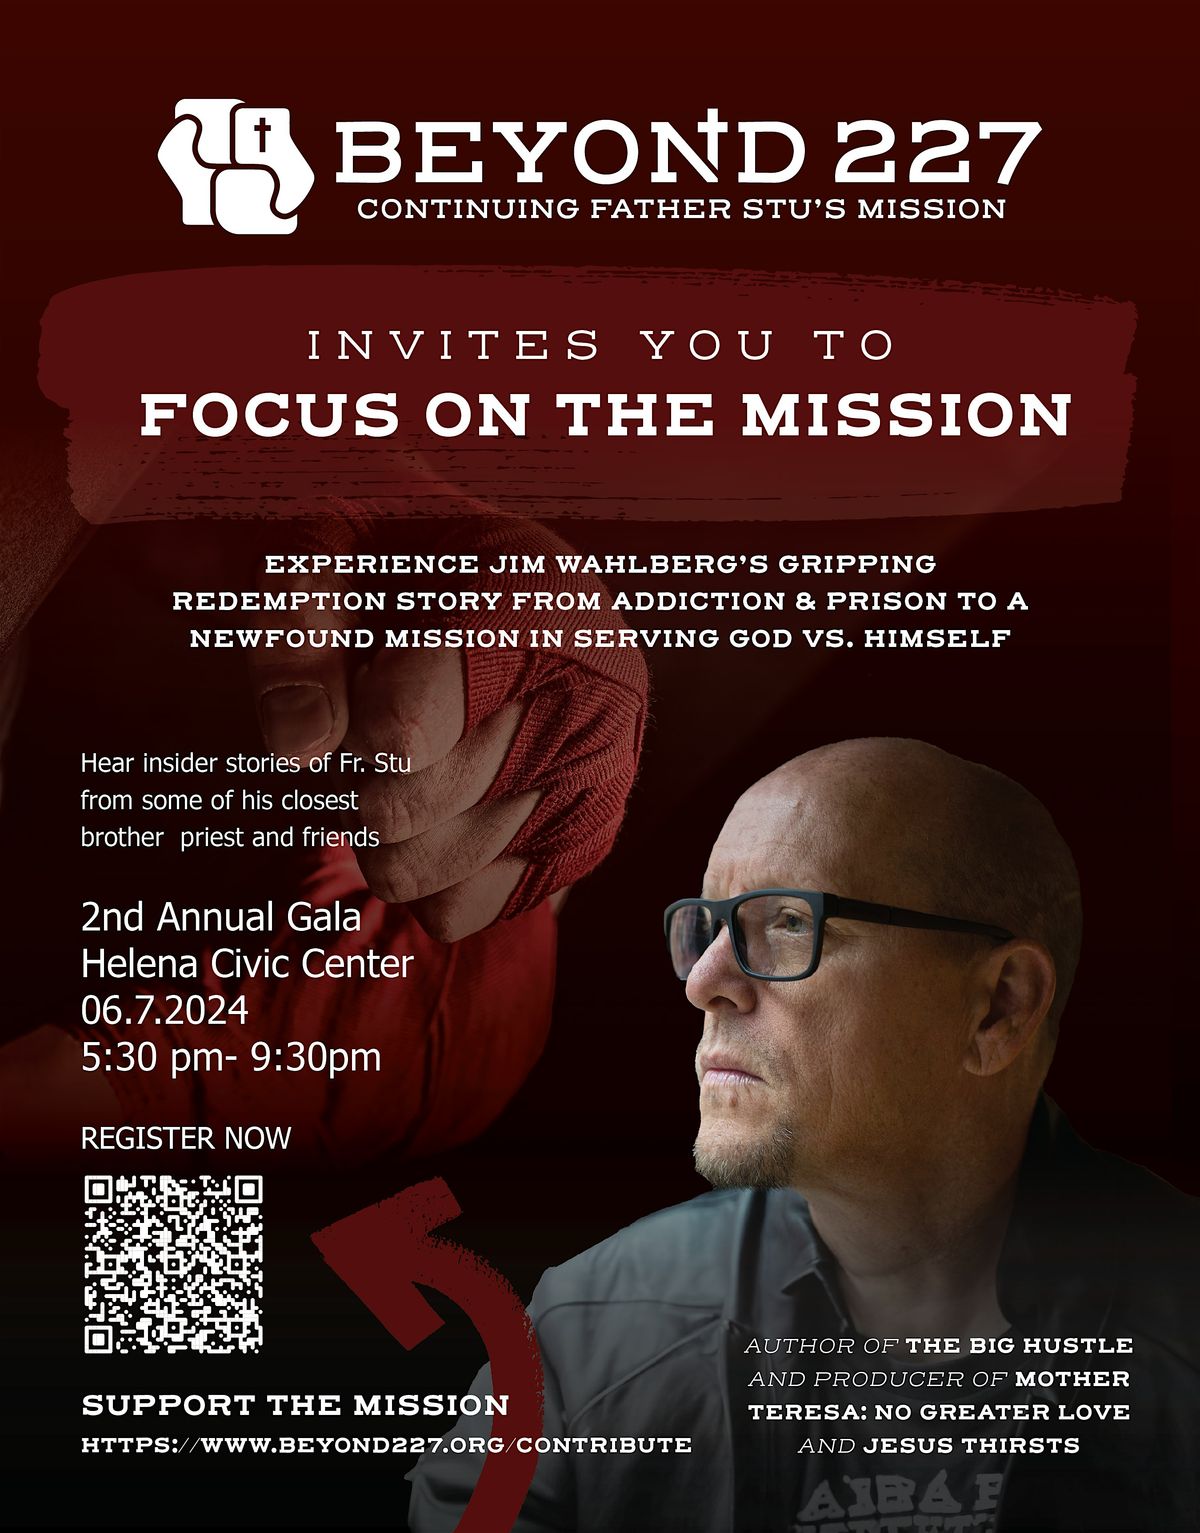 "Focus on the Mission" Father Stu Long